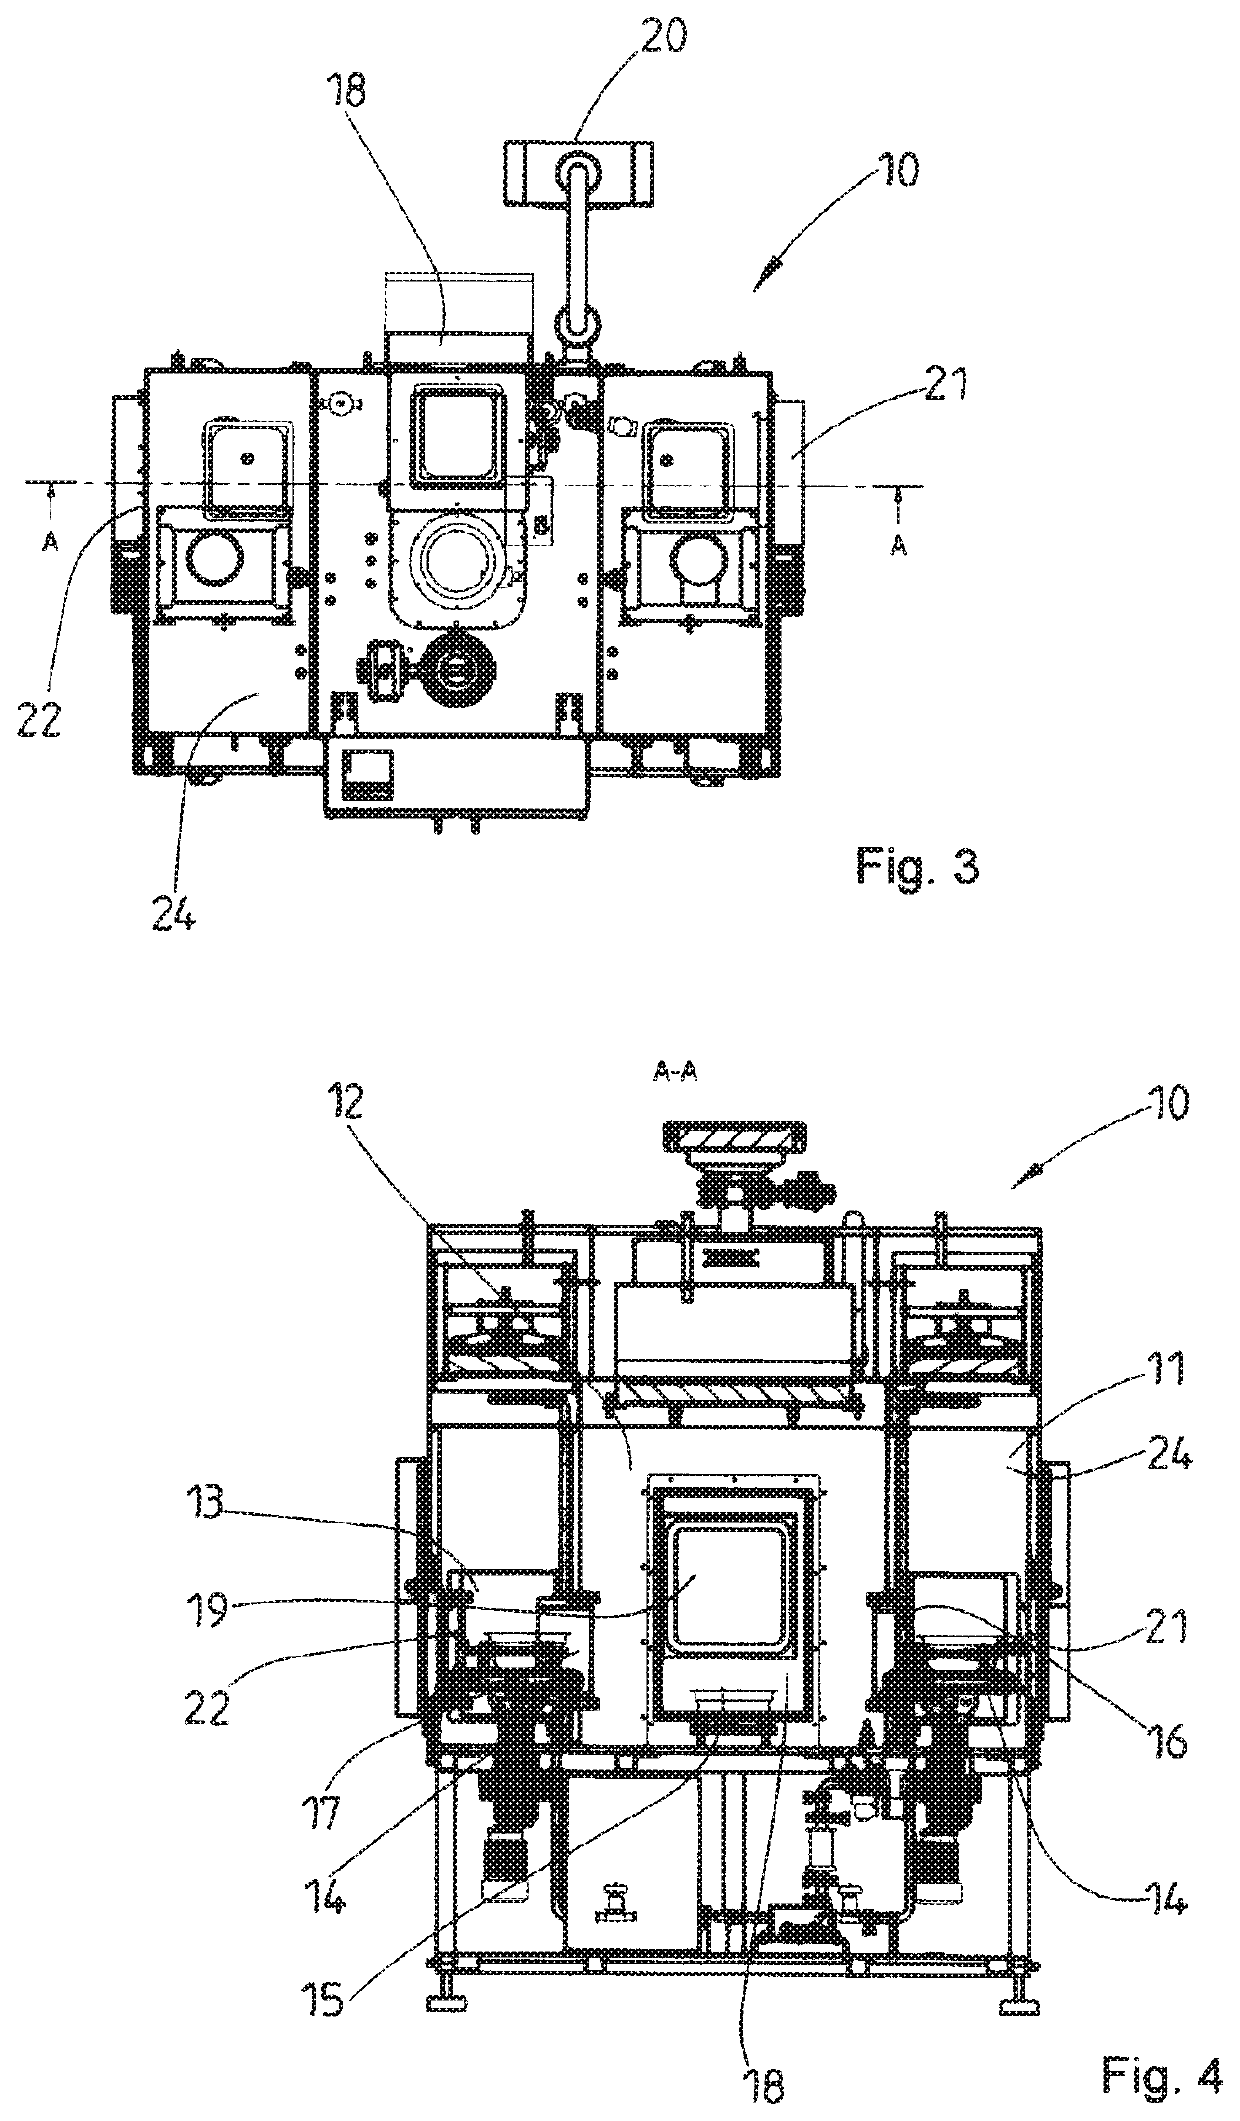 Method and apparatus for sterilizing an article by means of a pulsed light source